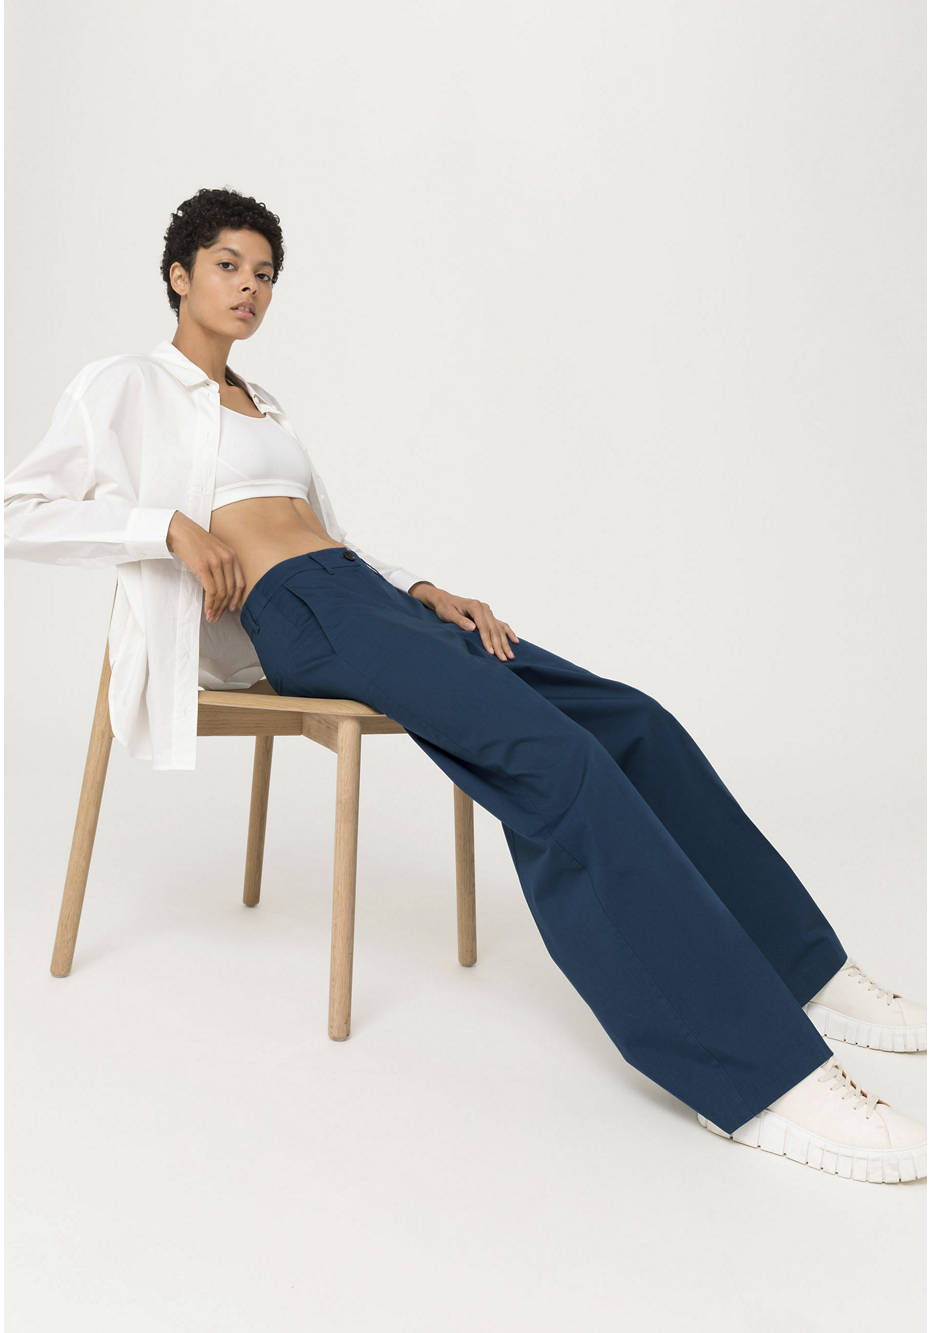 Wide leg pants made from organic cotton